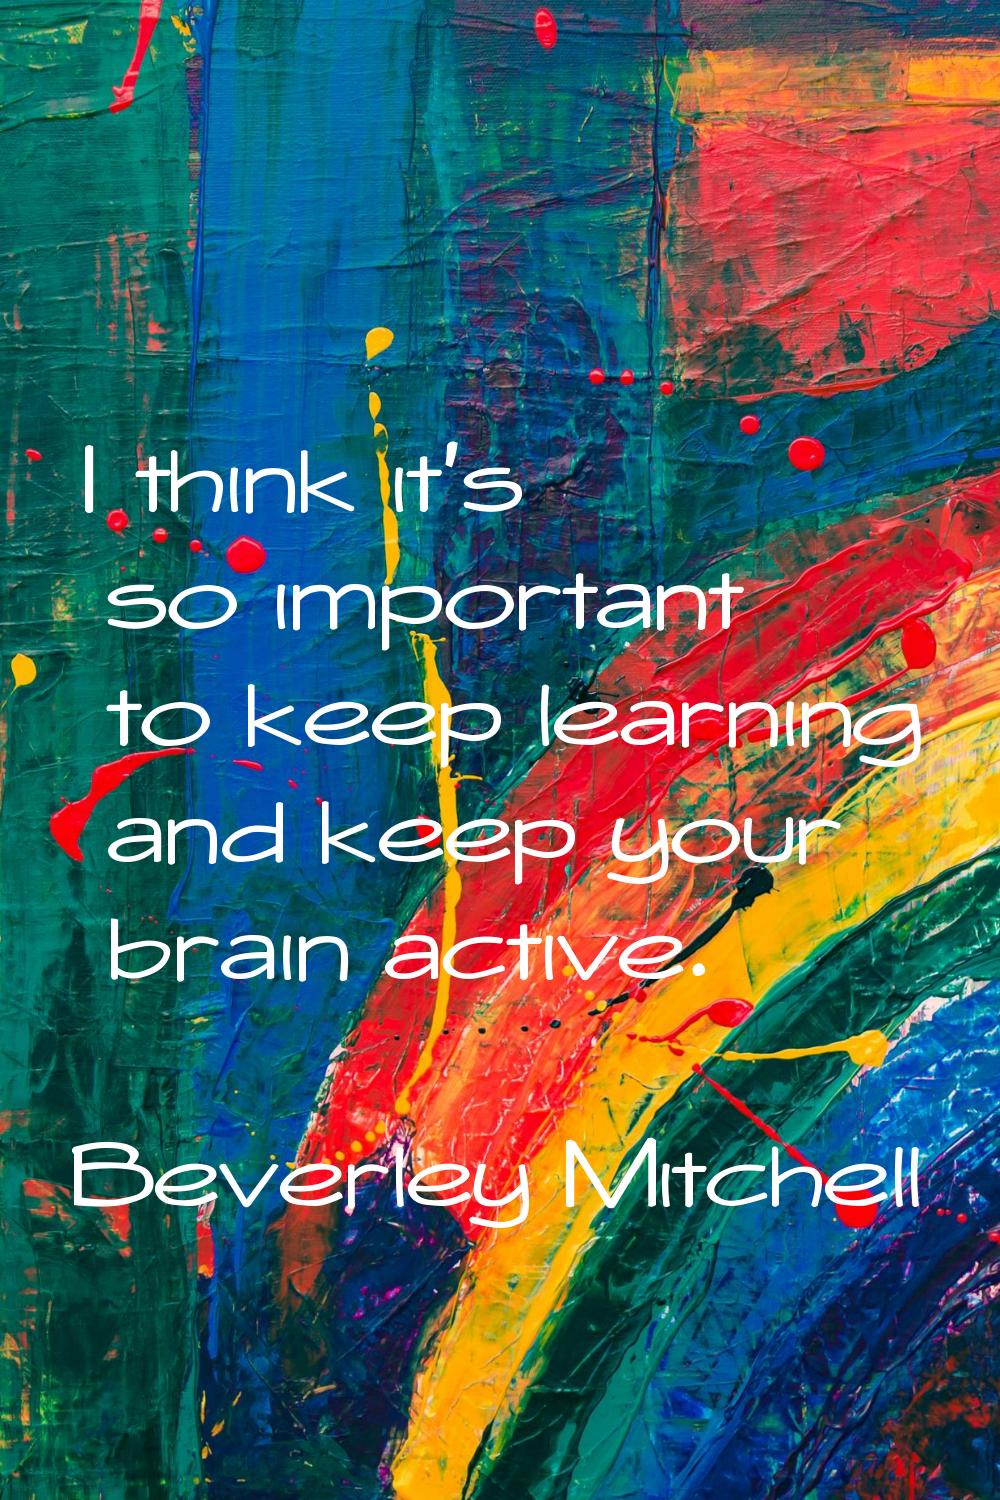 I think it's so important to keep learning and keep your brain active.